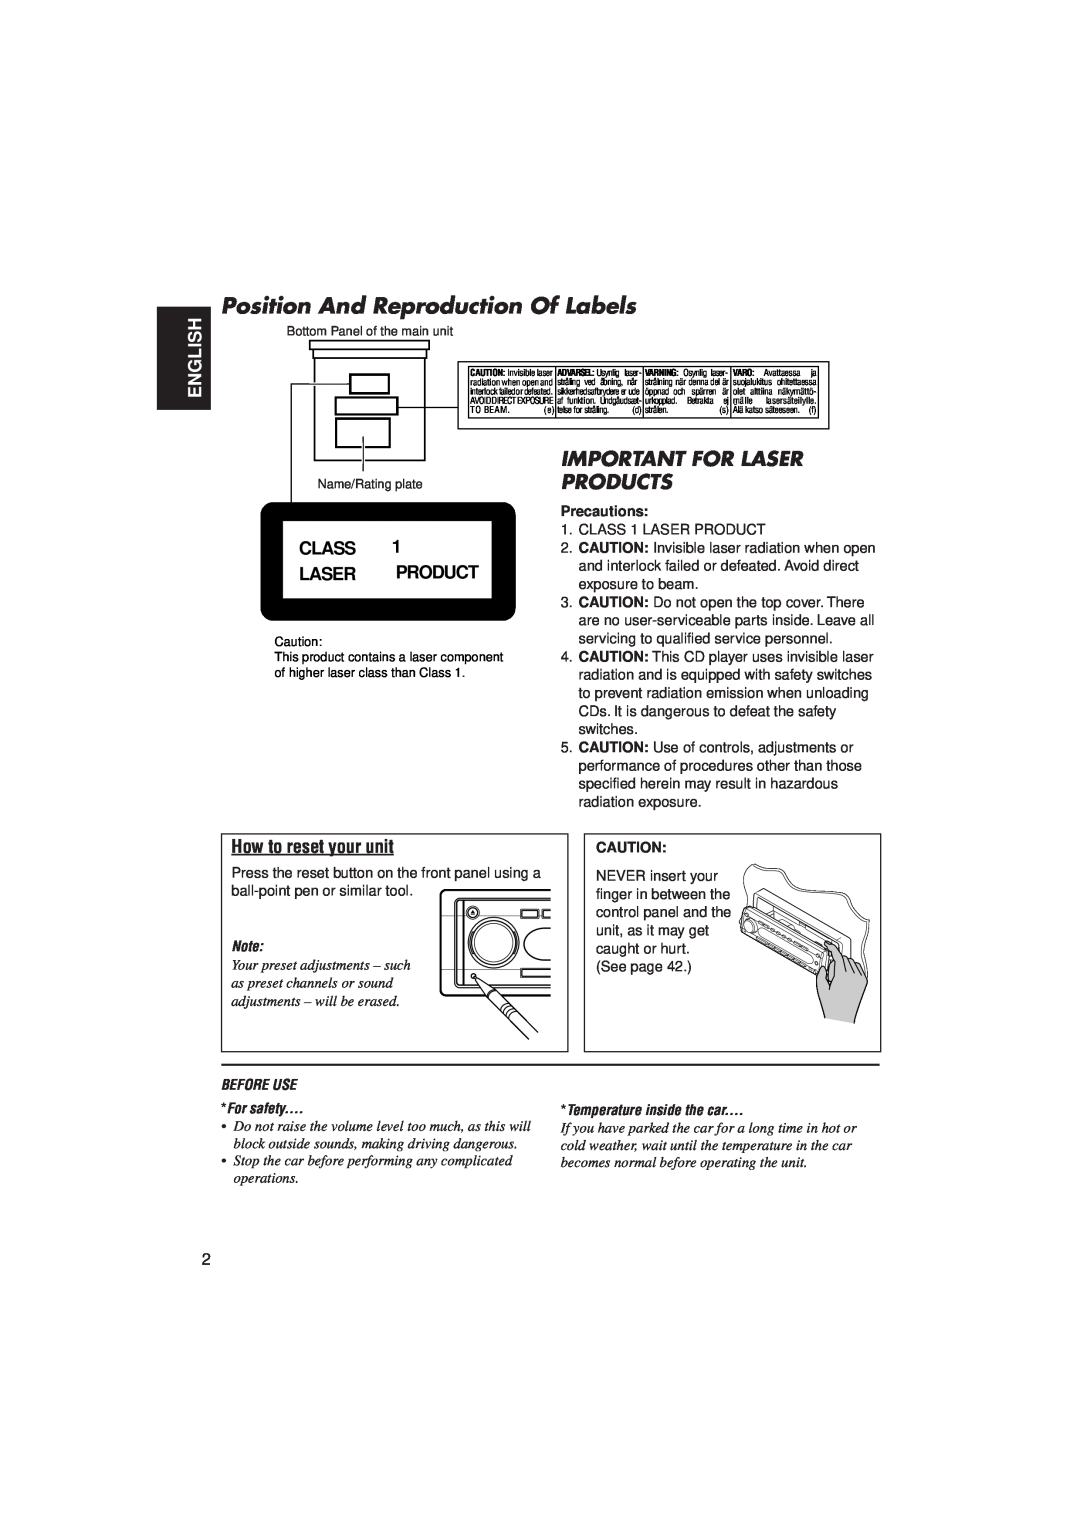 JVC KD-SH909R, KD-SH707R manual English, Class Laser Product, How to reset your unit, Position And Reproduction Of Labels 